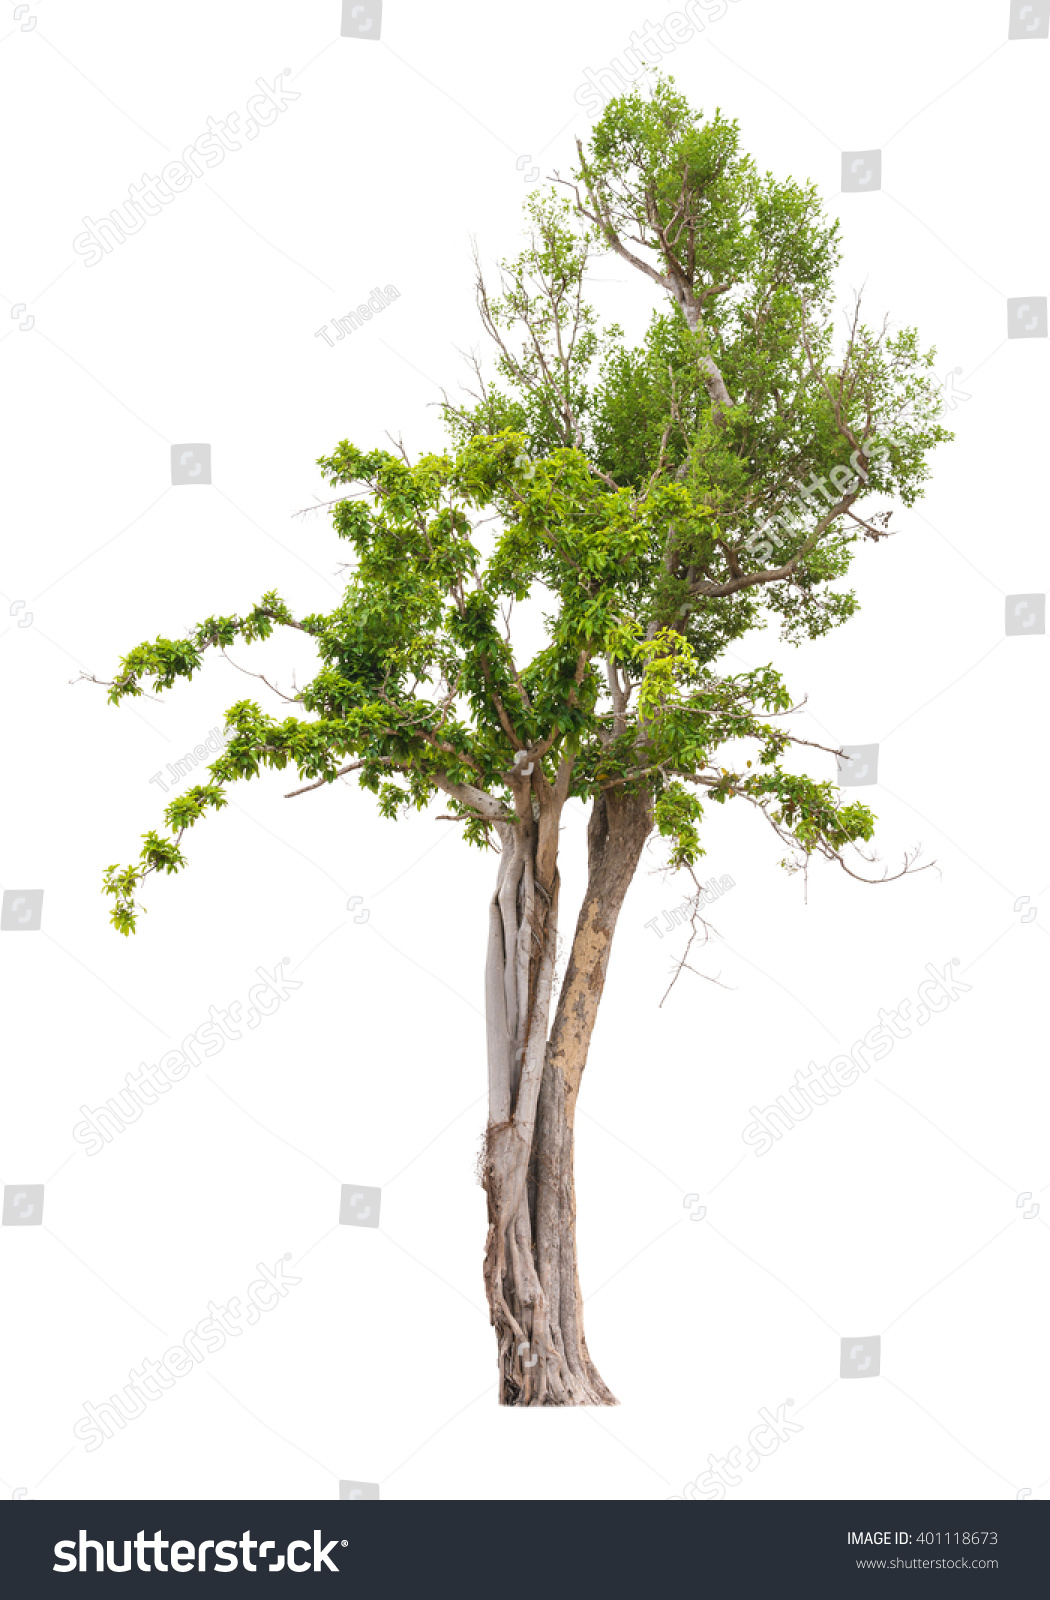 Tree Isolated On White Background Stock Photo 401118673 - Shutterstock